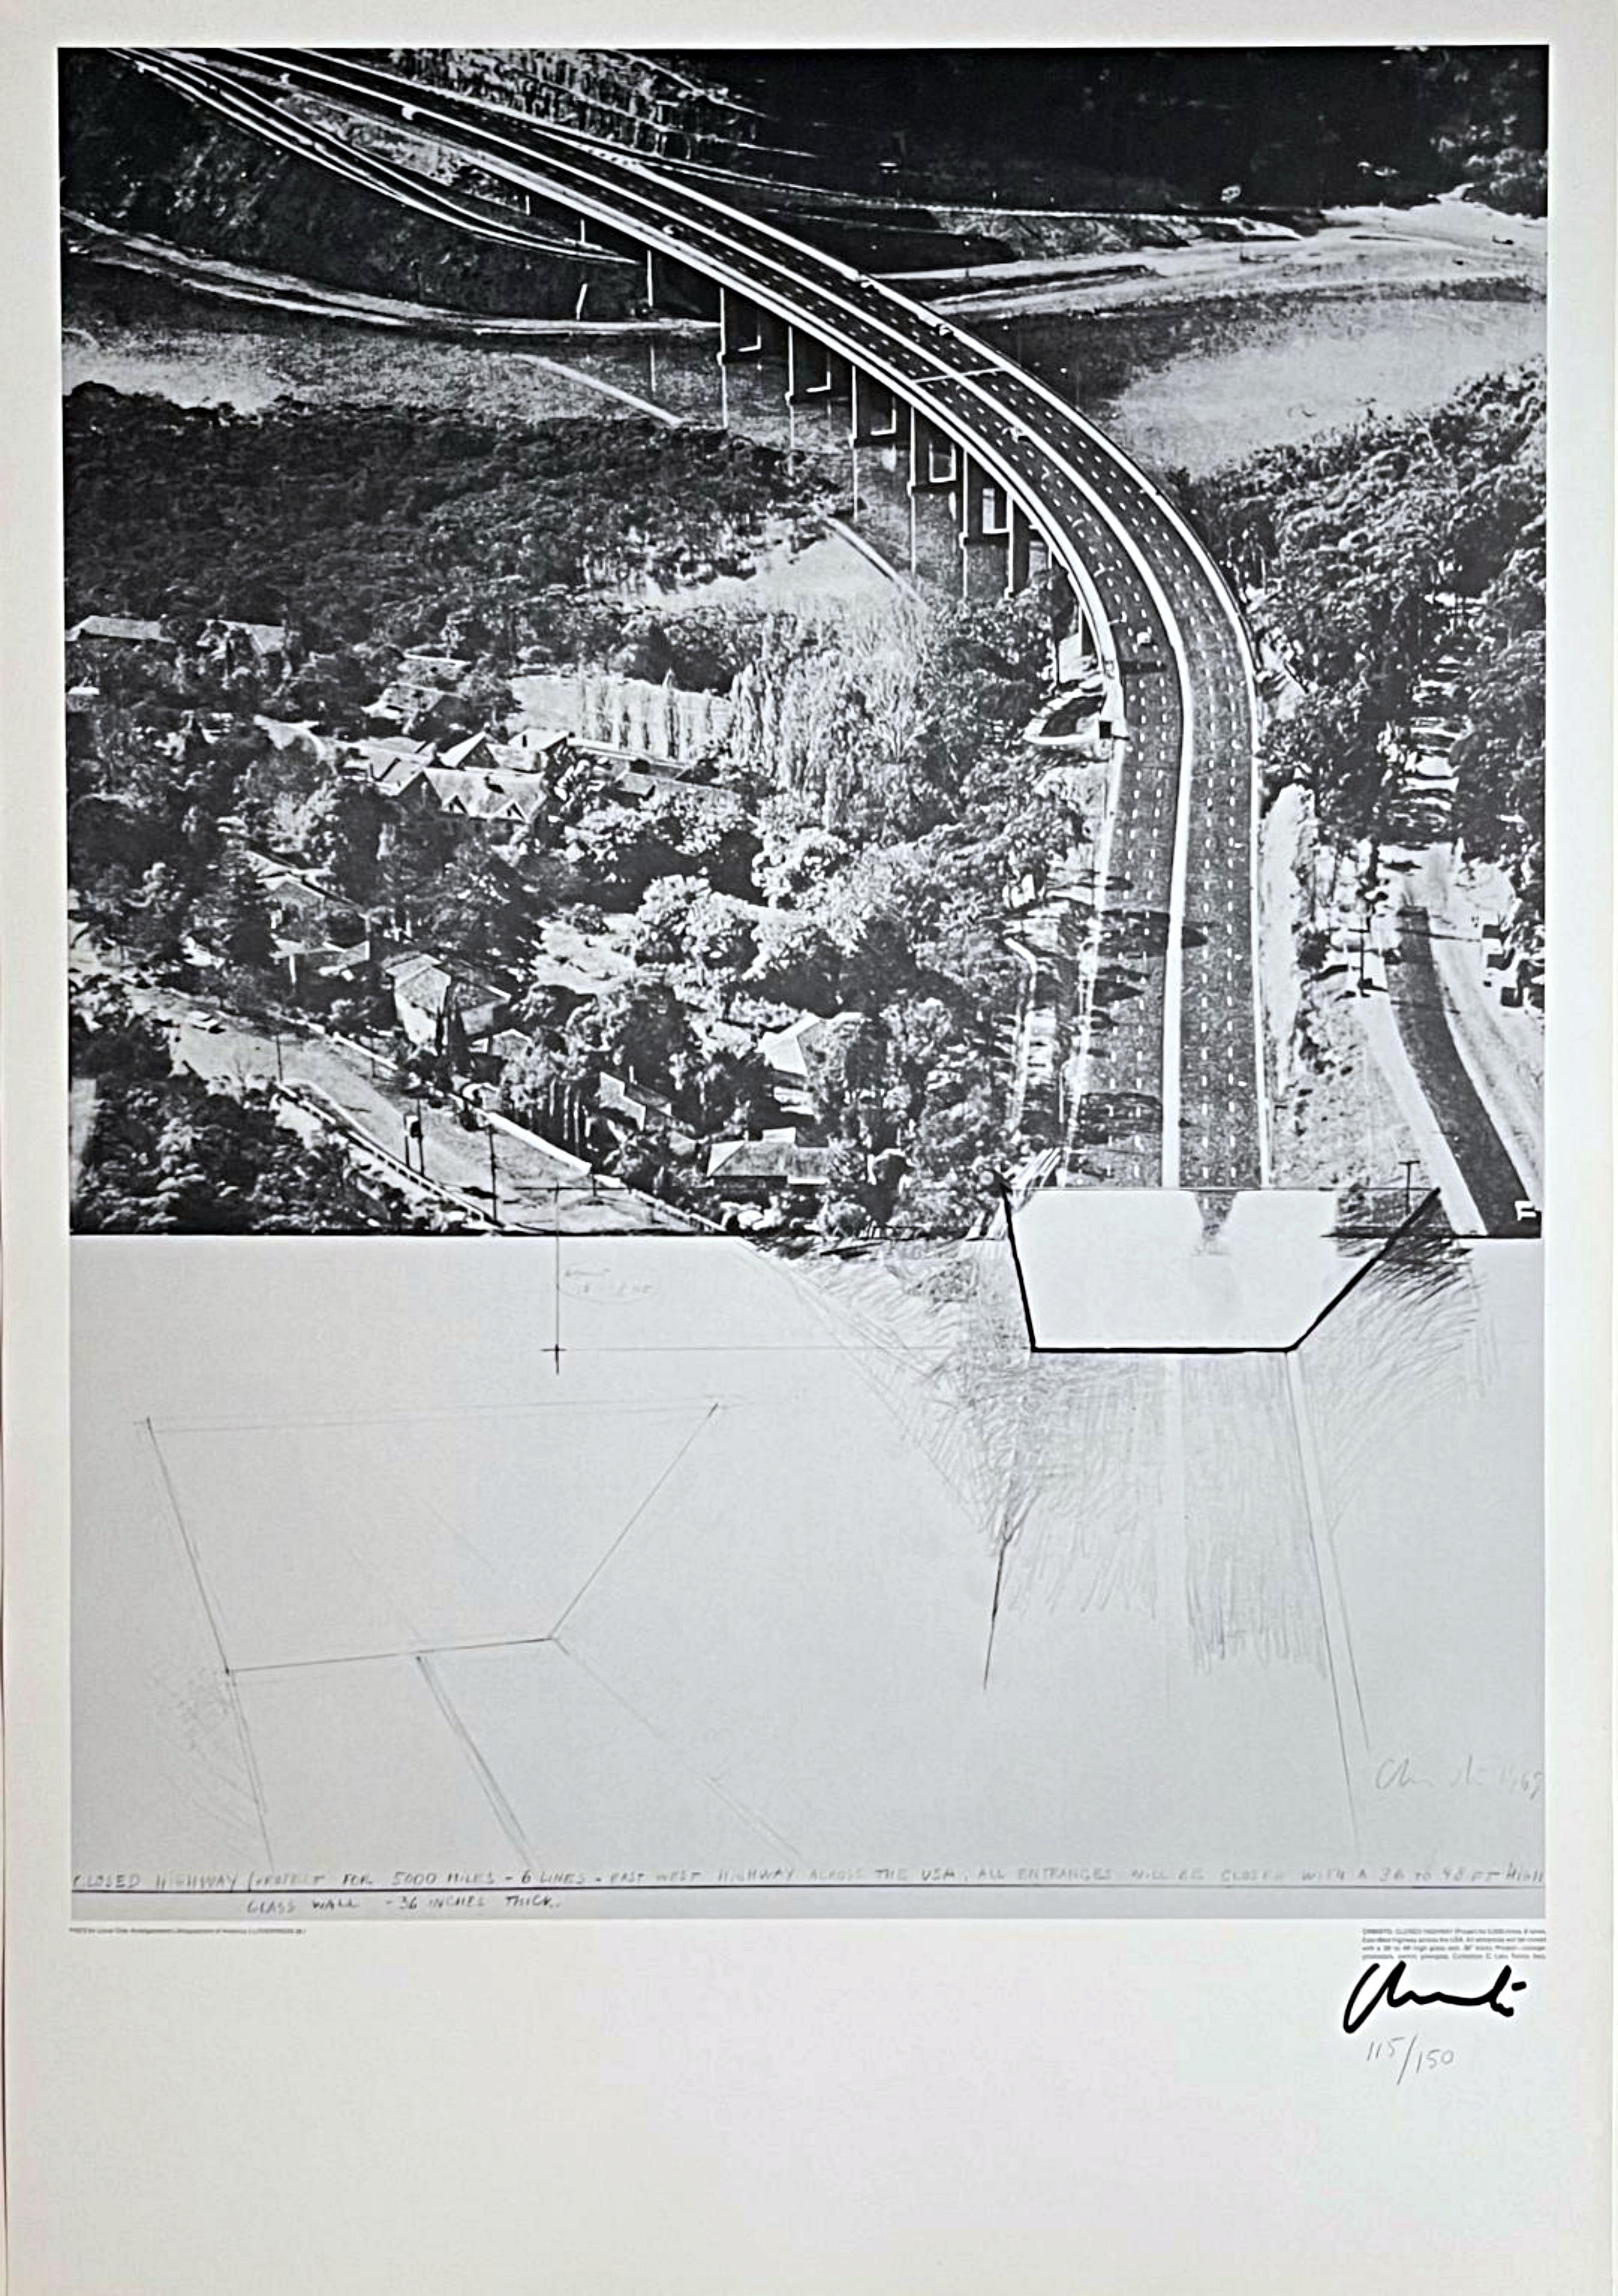 Christo Figurative Print - Signed and numbered lithograph for highway across America #115/150, Schelmann 51